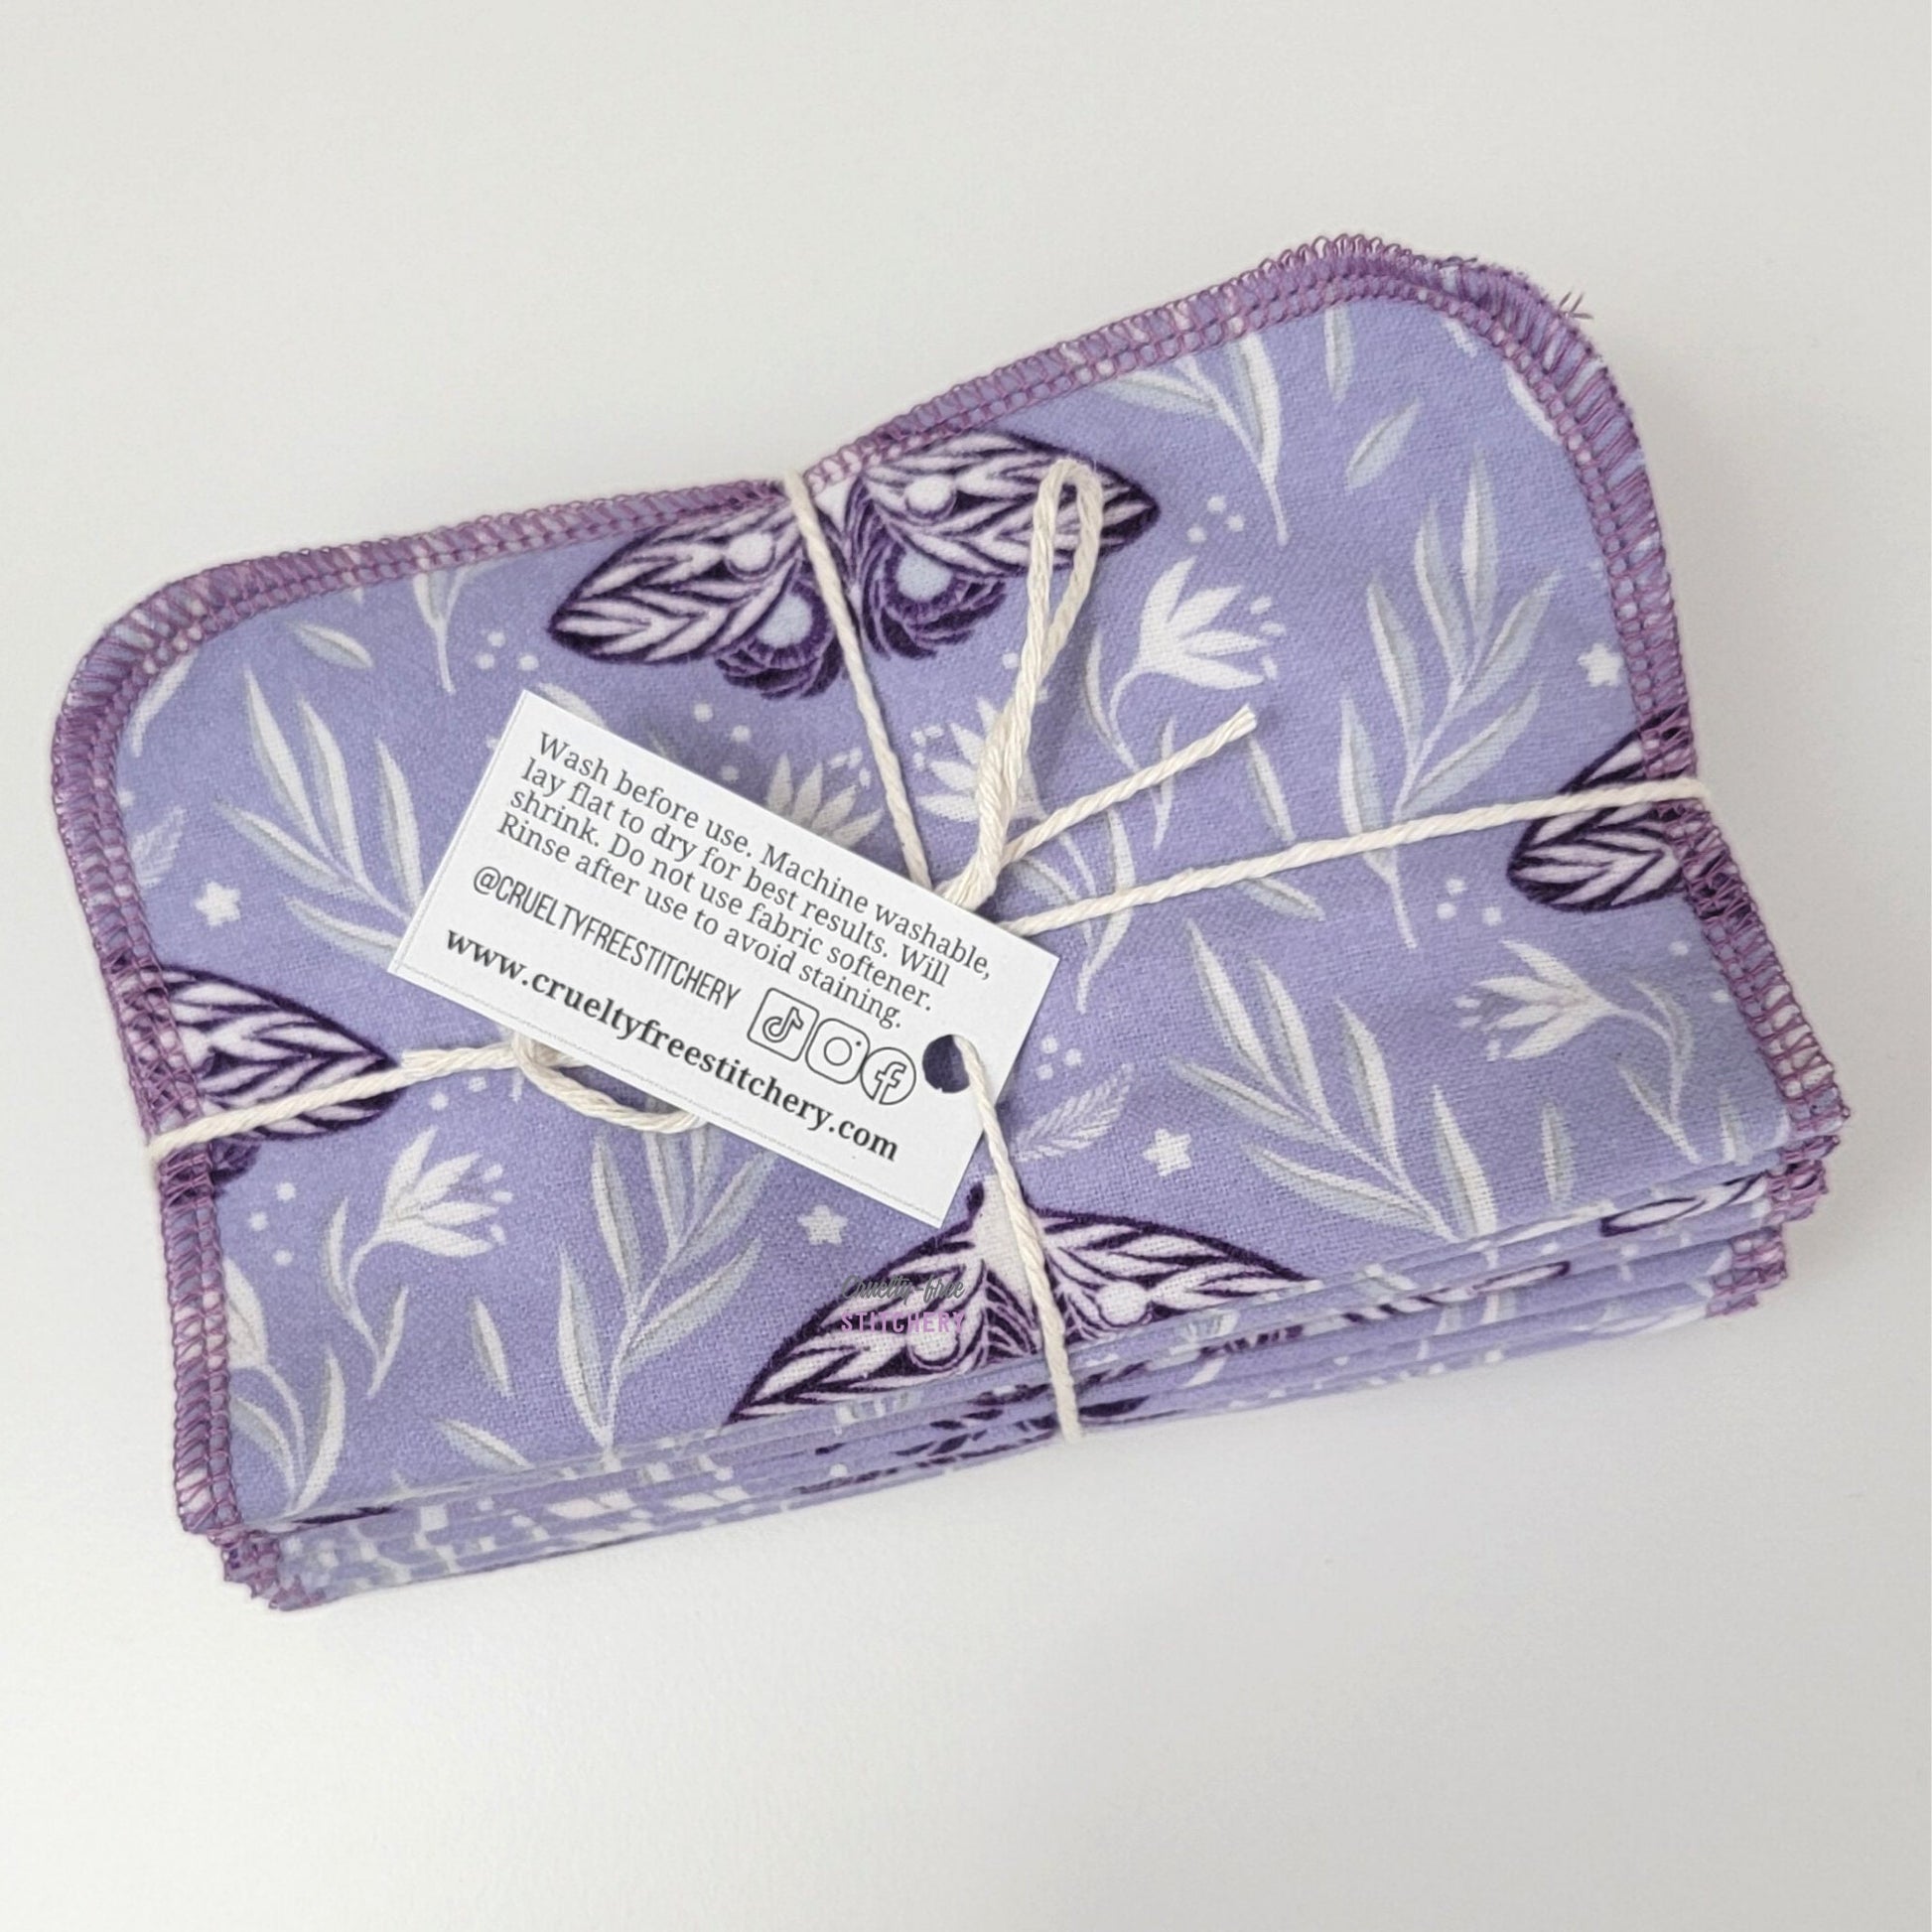 Bundled purple moths cloth wipes with the back of the small white tag showing.